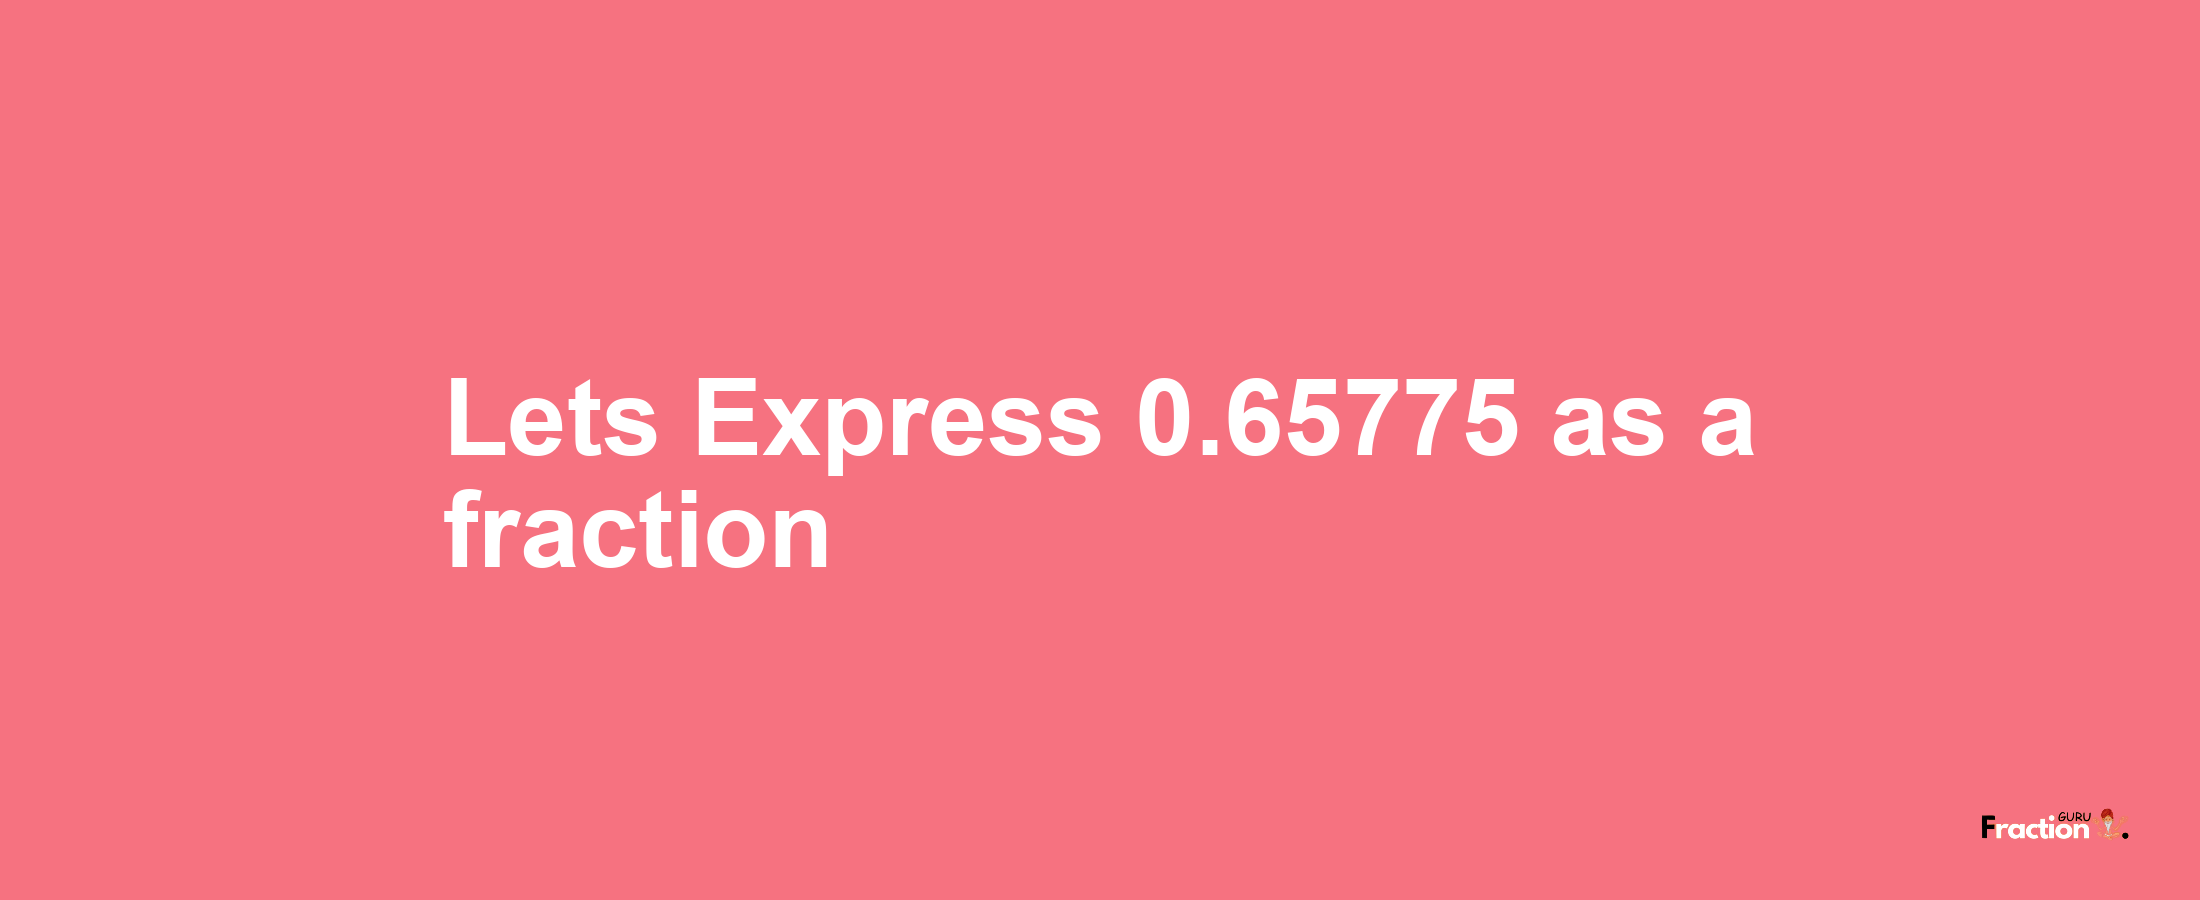 Lets Express 0.65775 as afraction